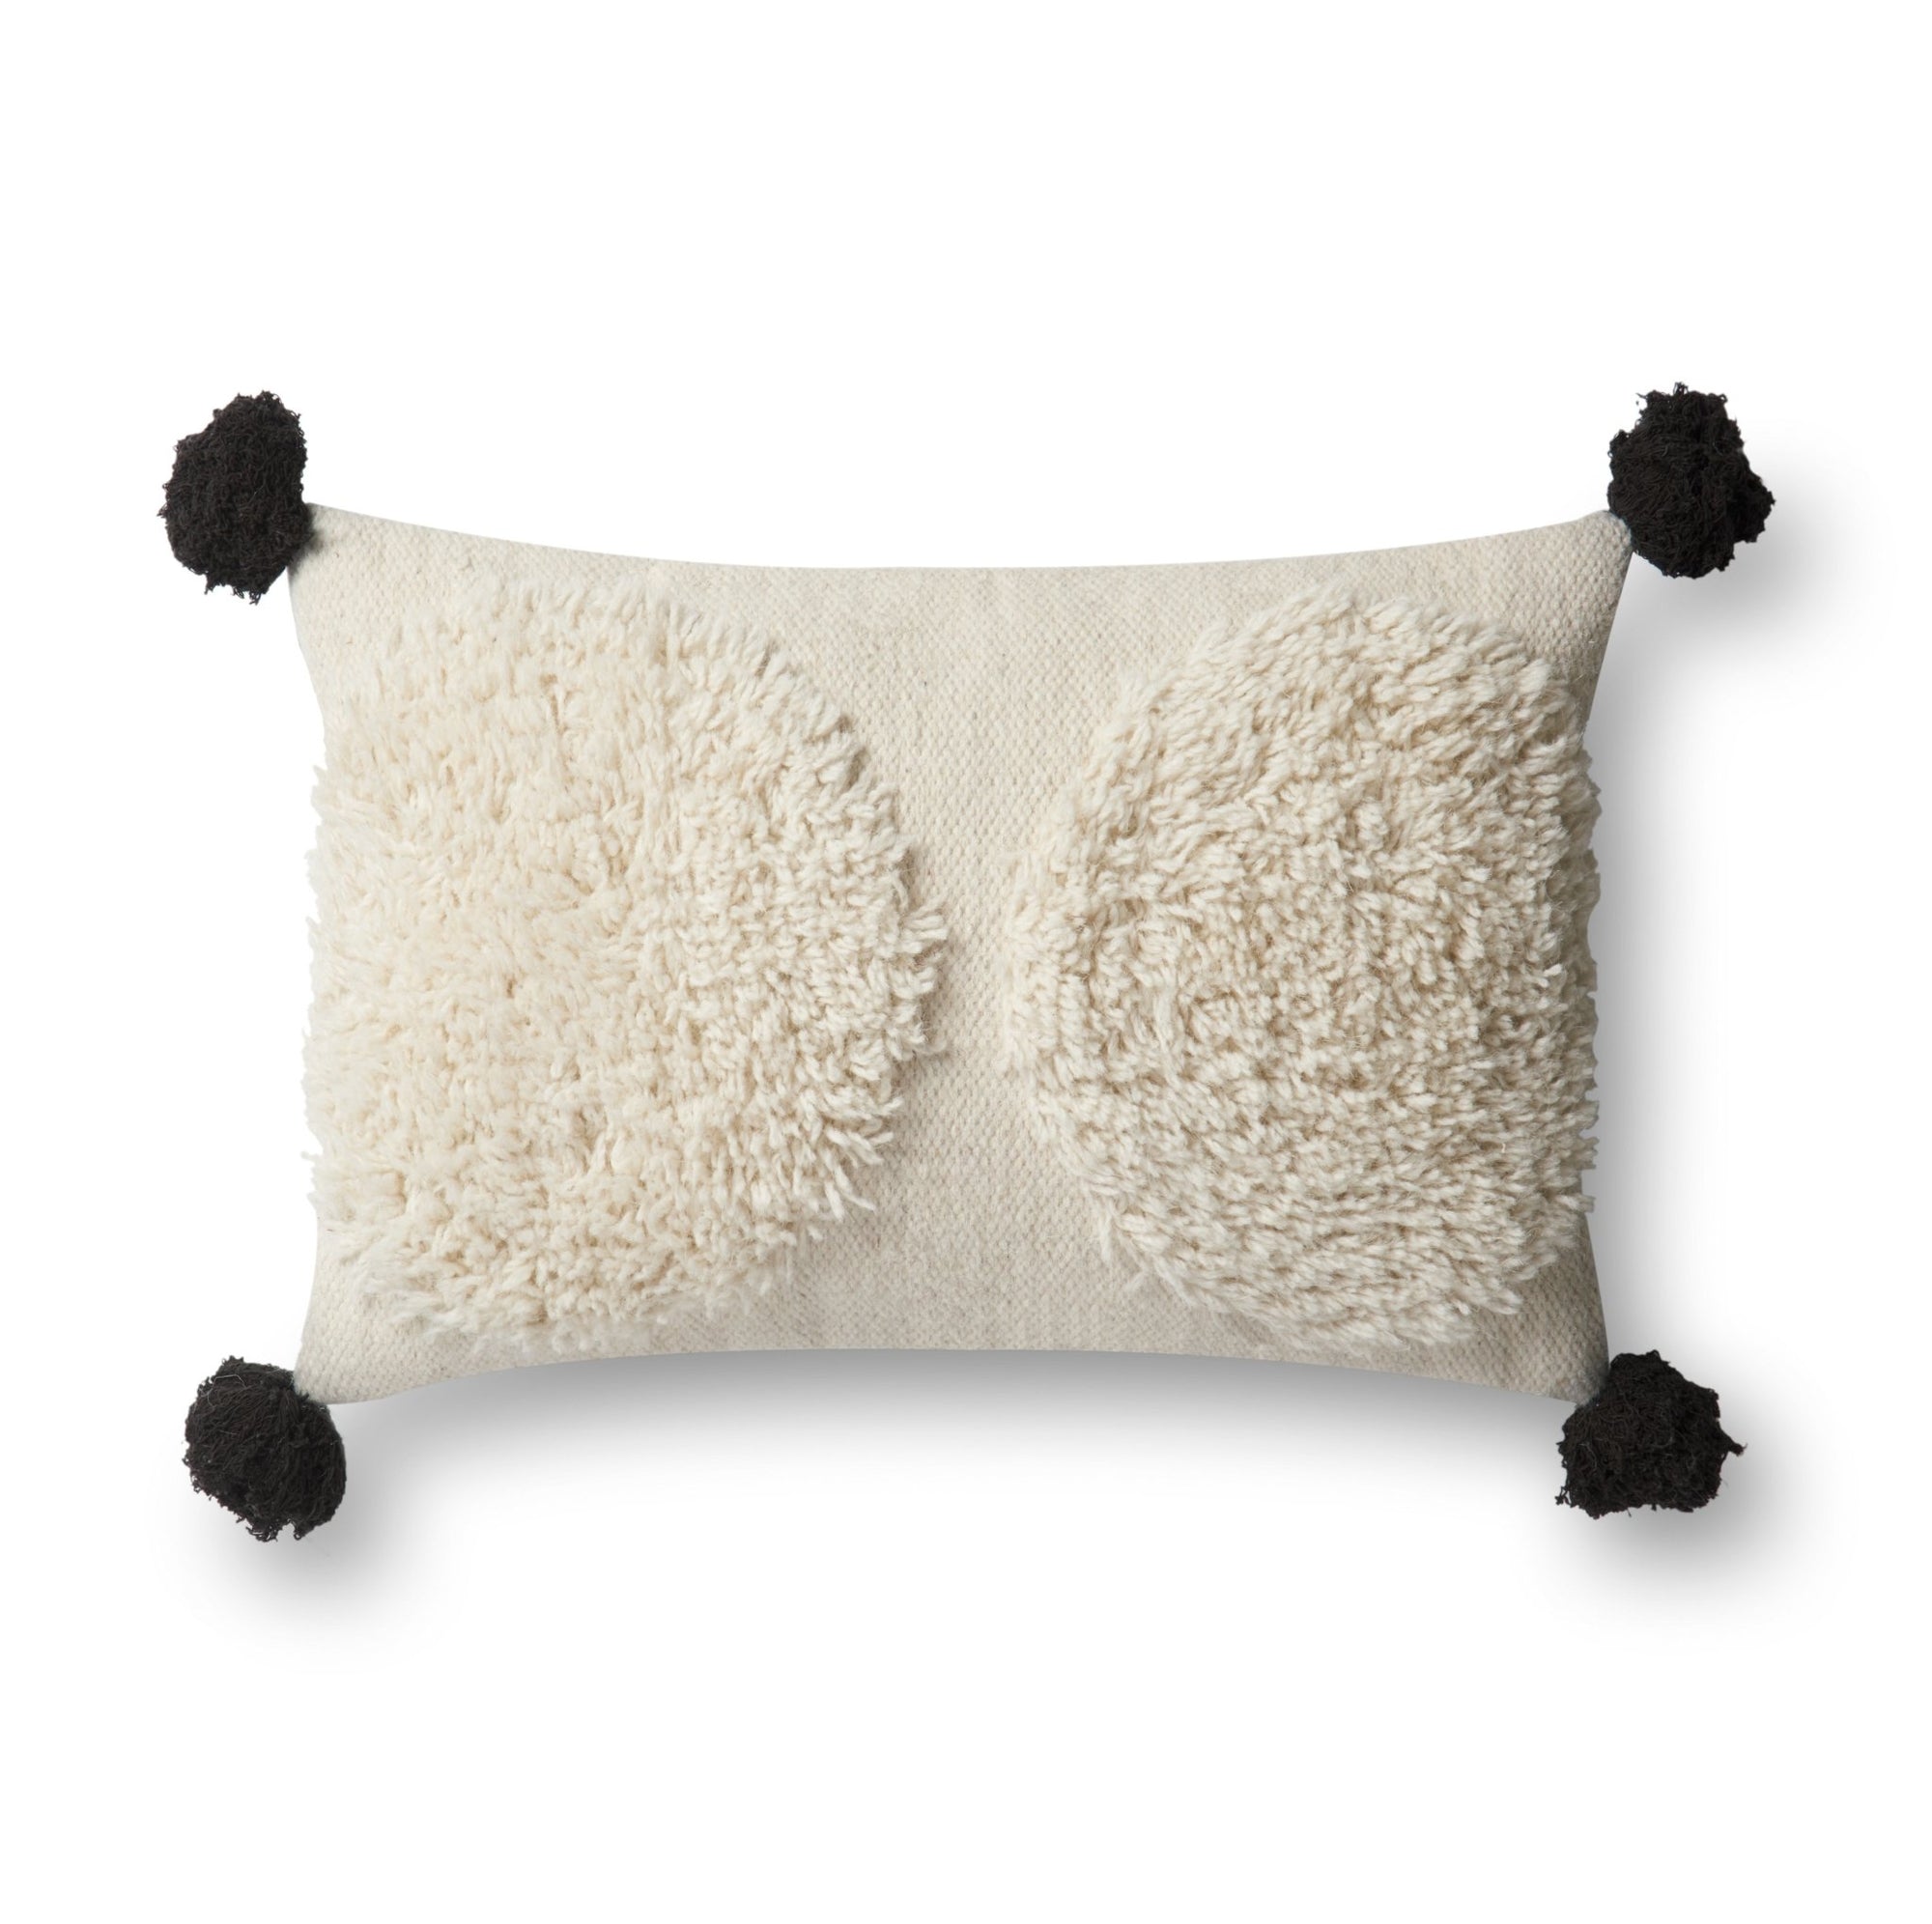 Loloi By Justina Blakeney X P0483 Ivory/Black Pillow - Rug & Home